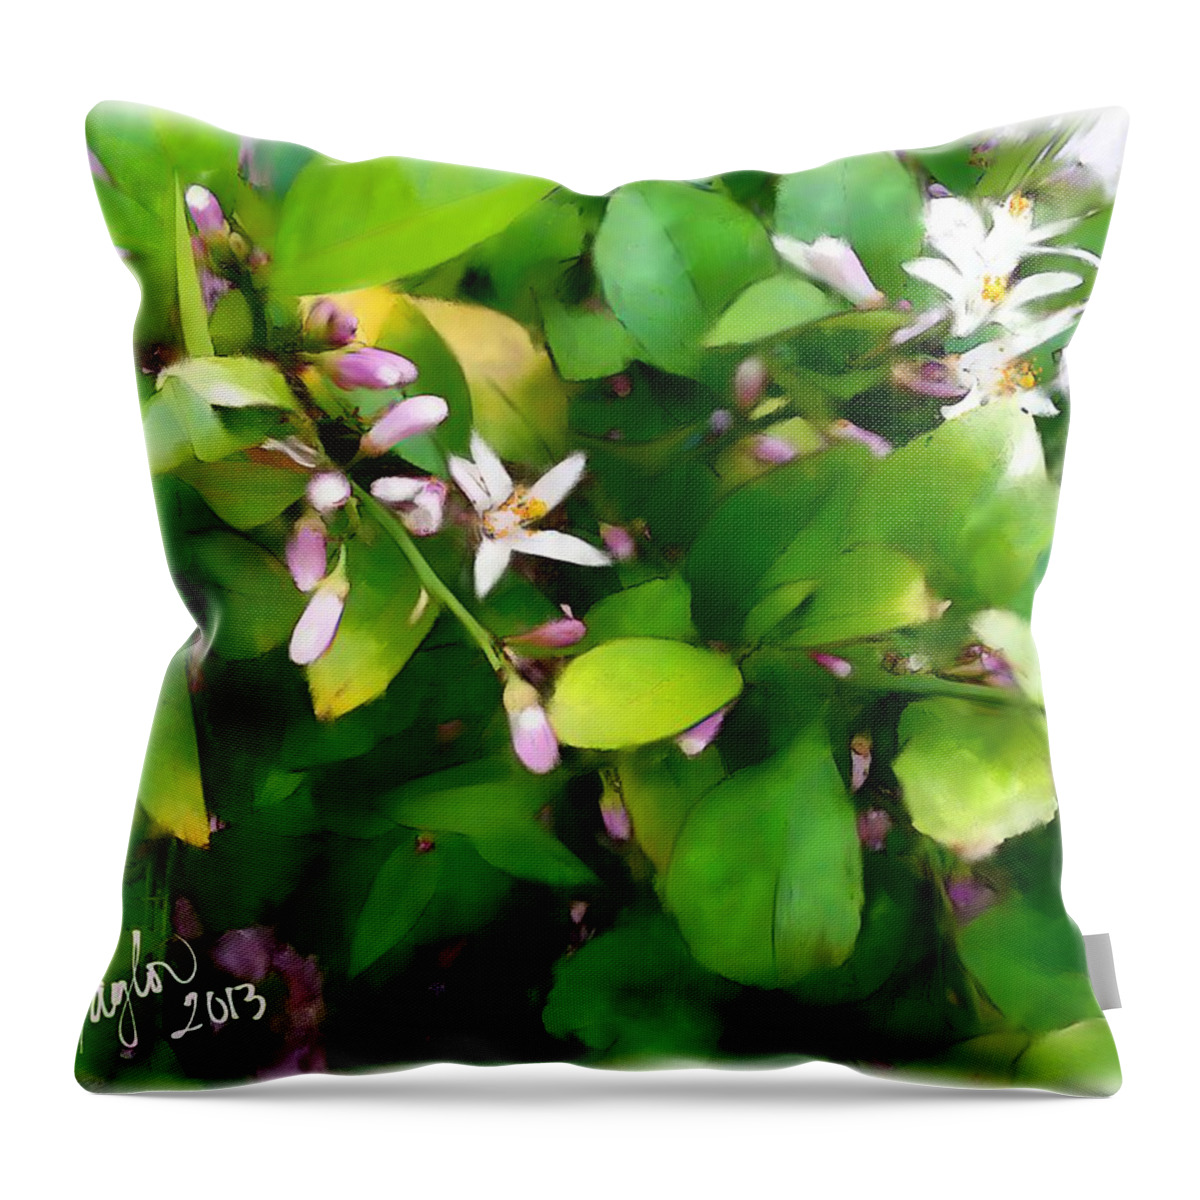 Peach Blossom Throw Pillow featuring the digital art Peach Blossoms by Colleen Taylor